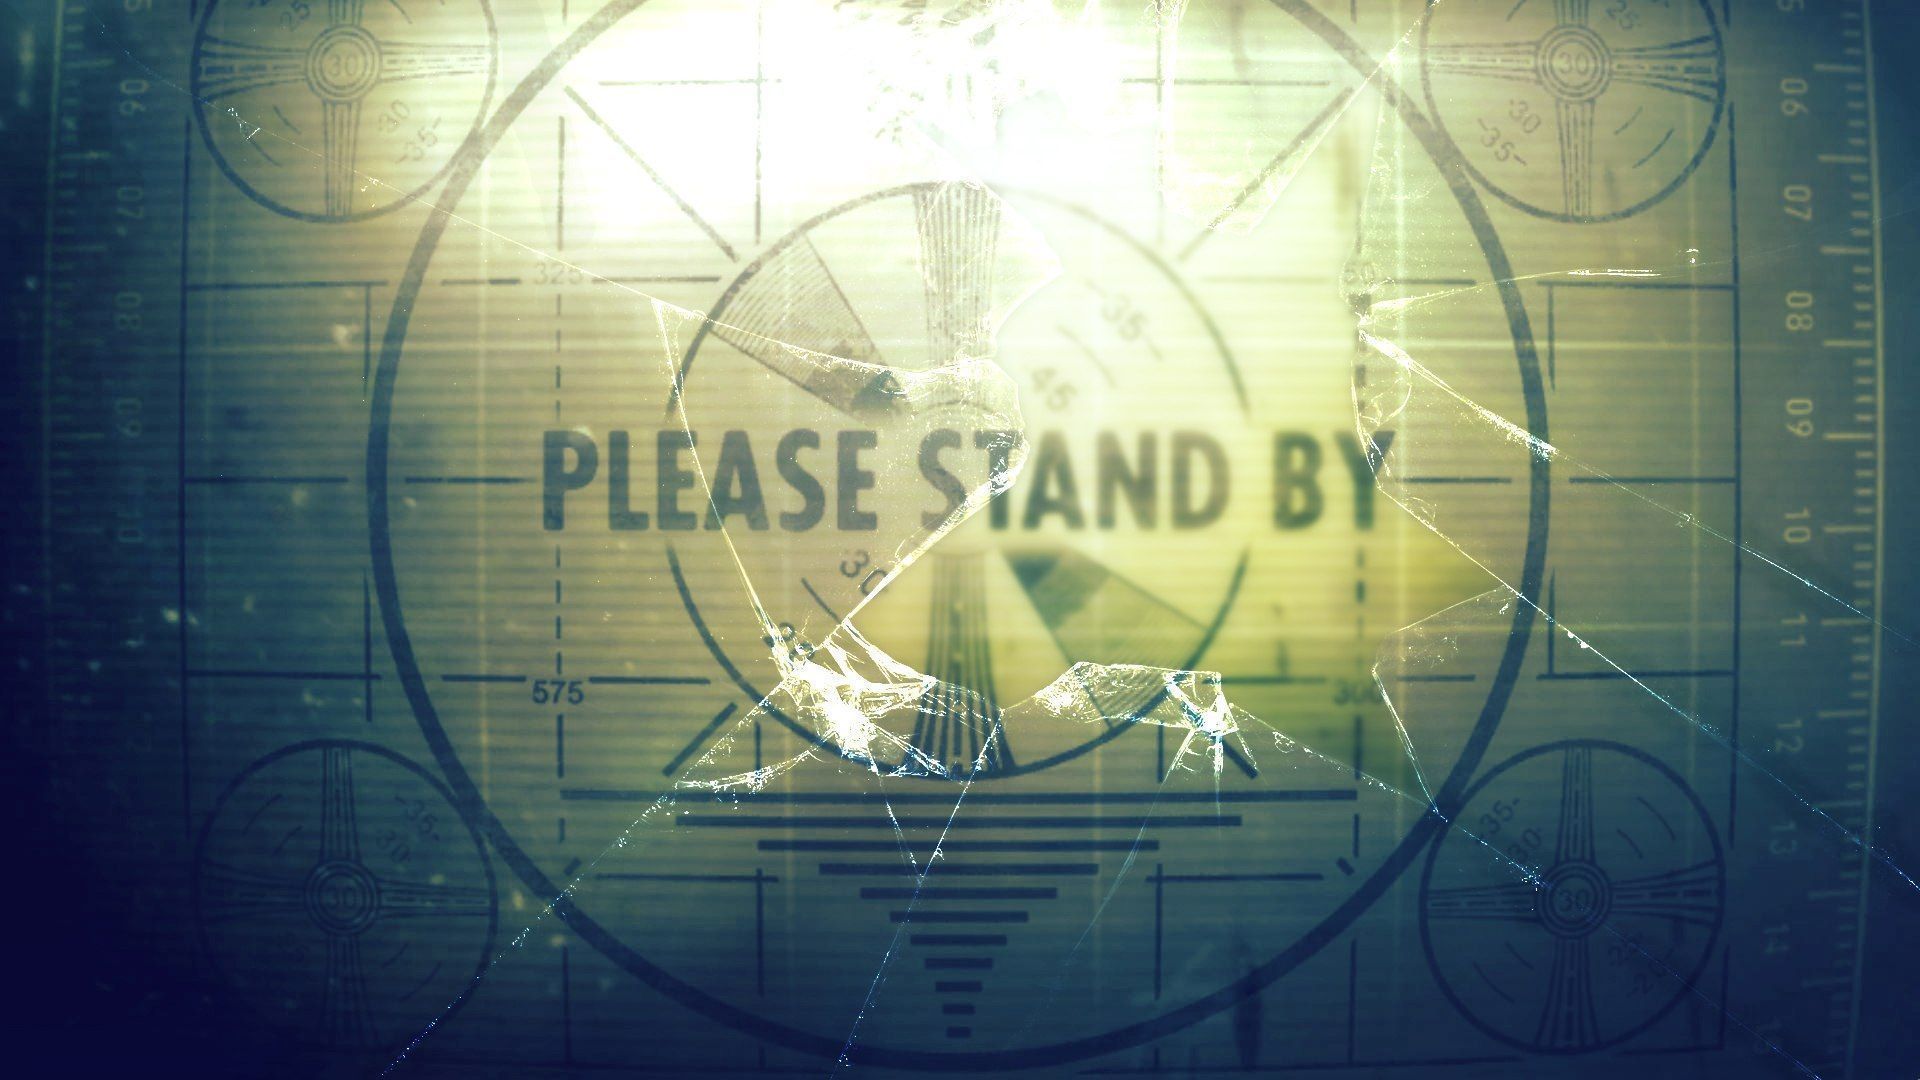 Fallout wallpaper 1920x1080 - High Quality and other